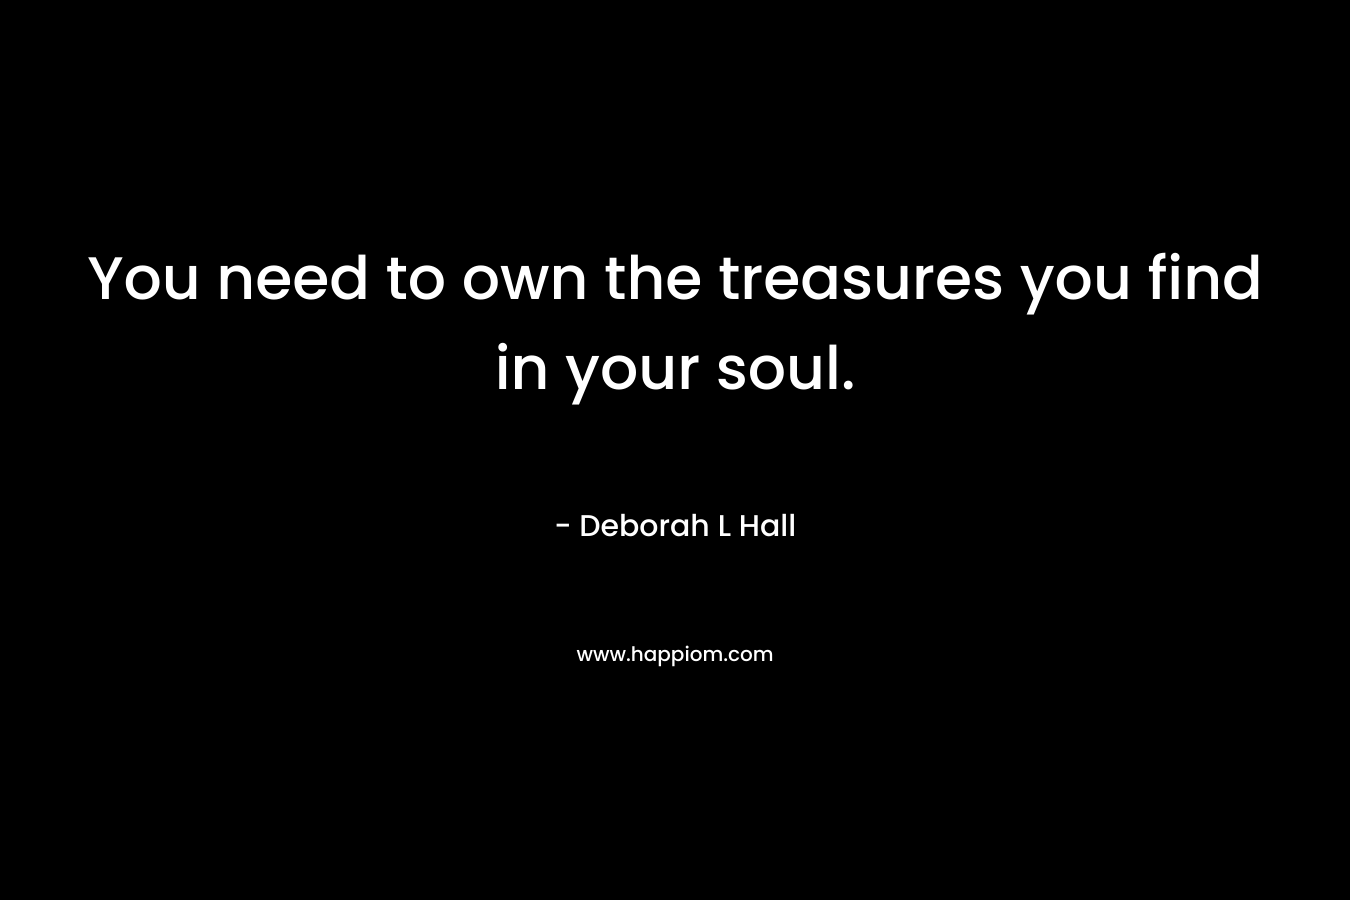 You need to own the treasures you find in your soul. – Deborah L Hall